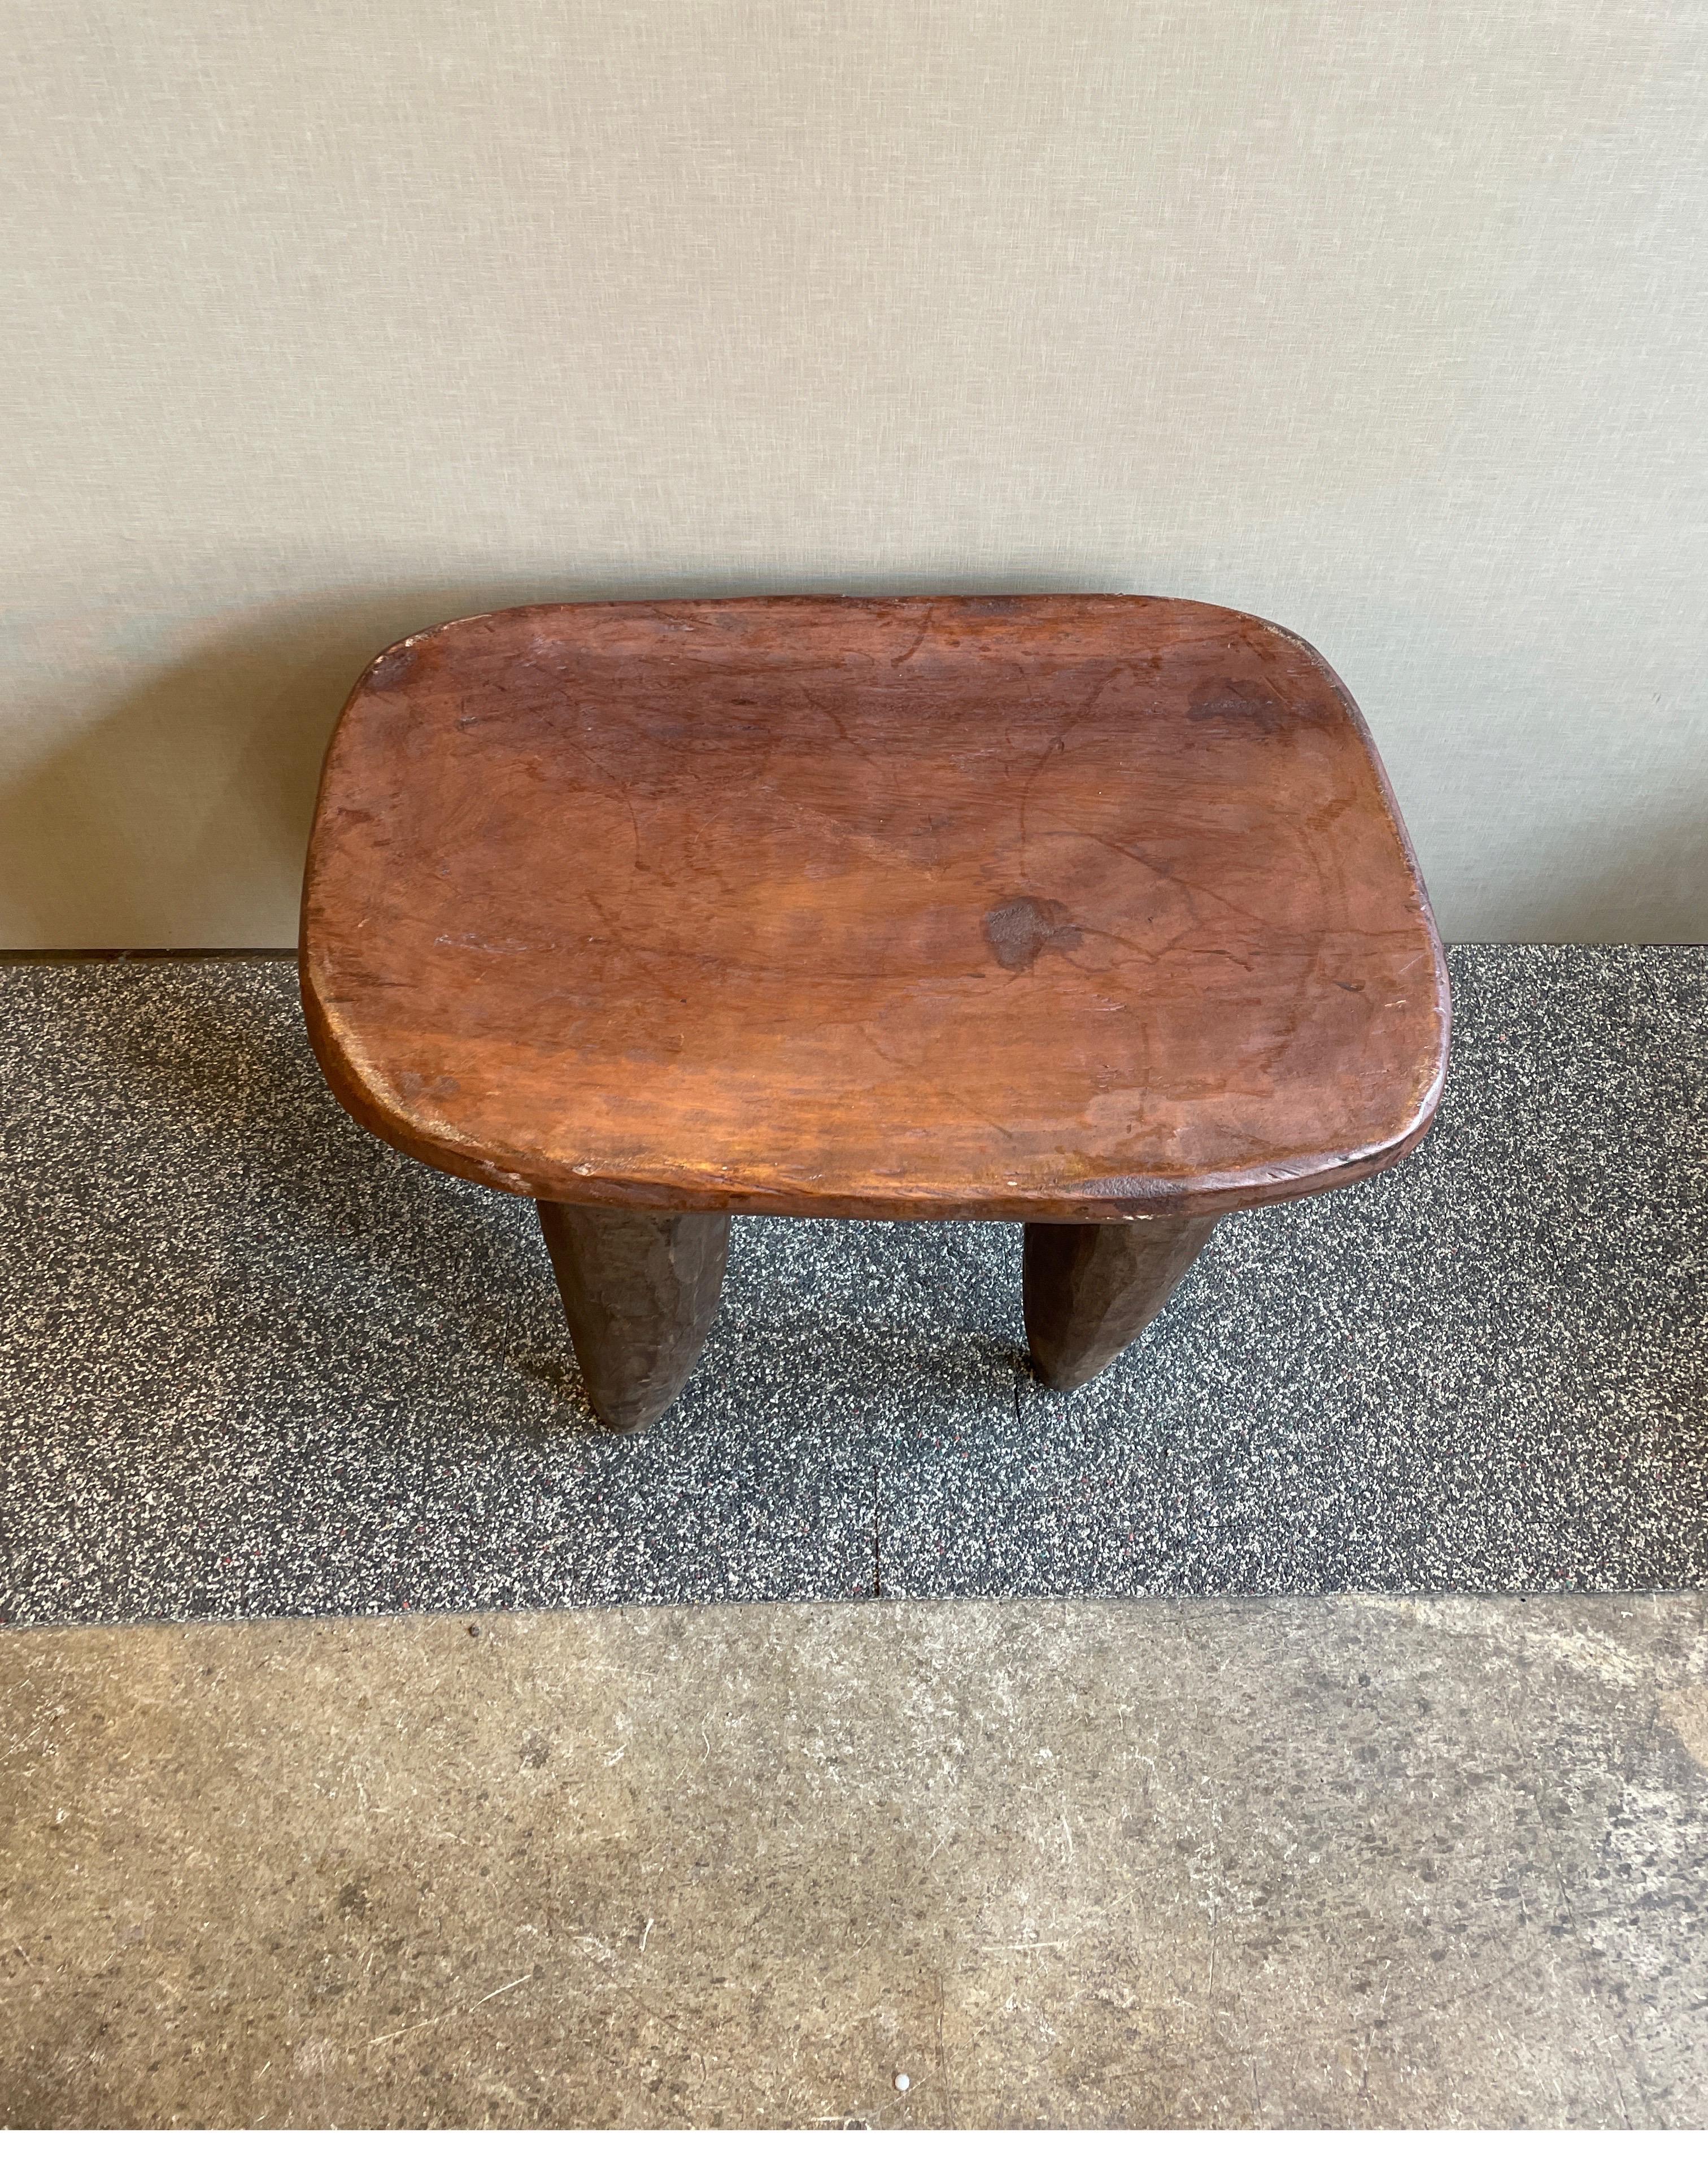 A Senufo stool or side table made from one piece of wood from the Ivory Coast. 